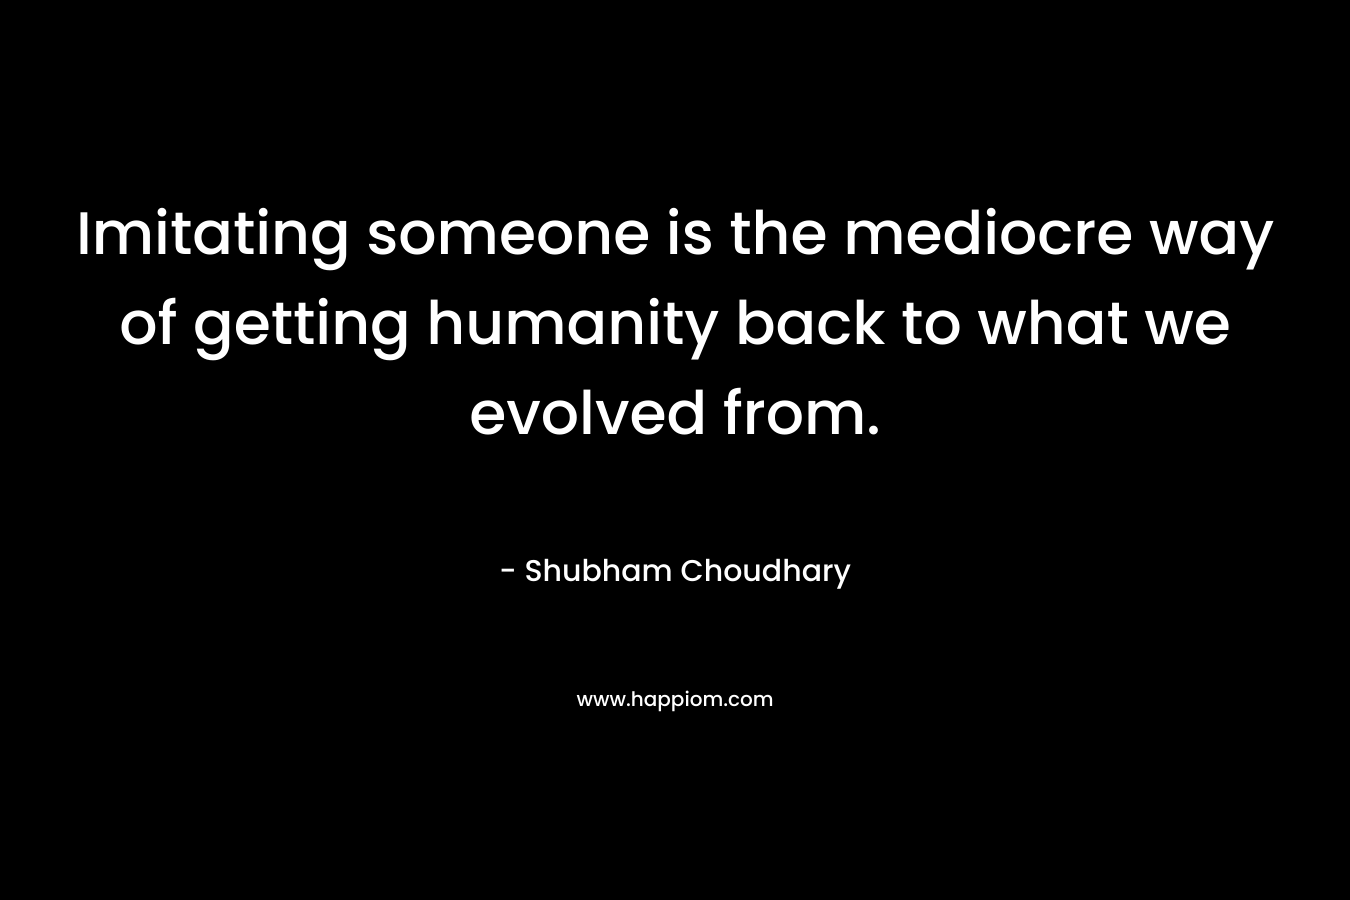 Imitating someone is the mediocre way of getting humanity back to what we evolved from.